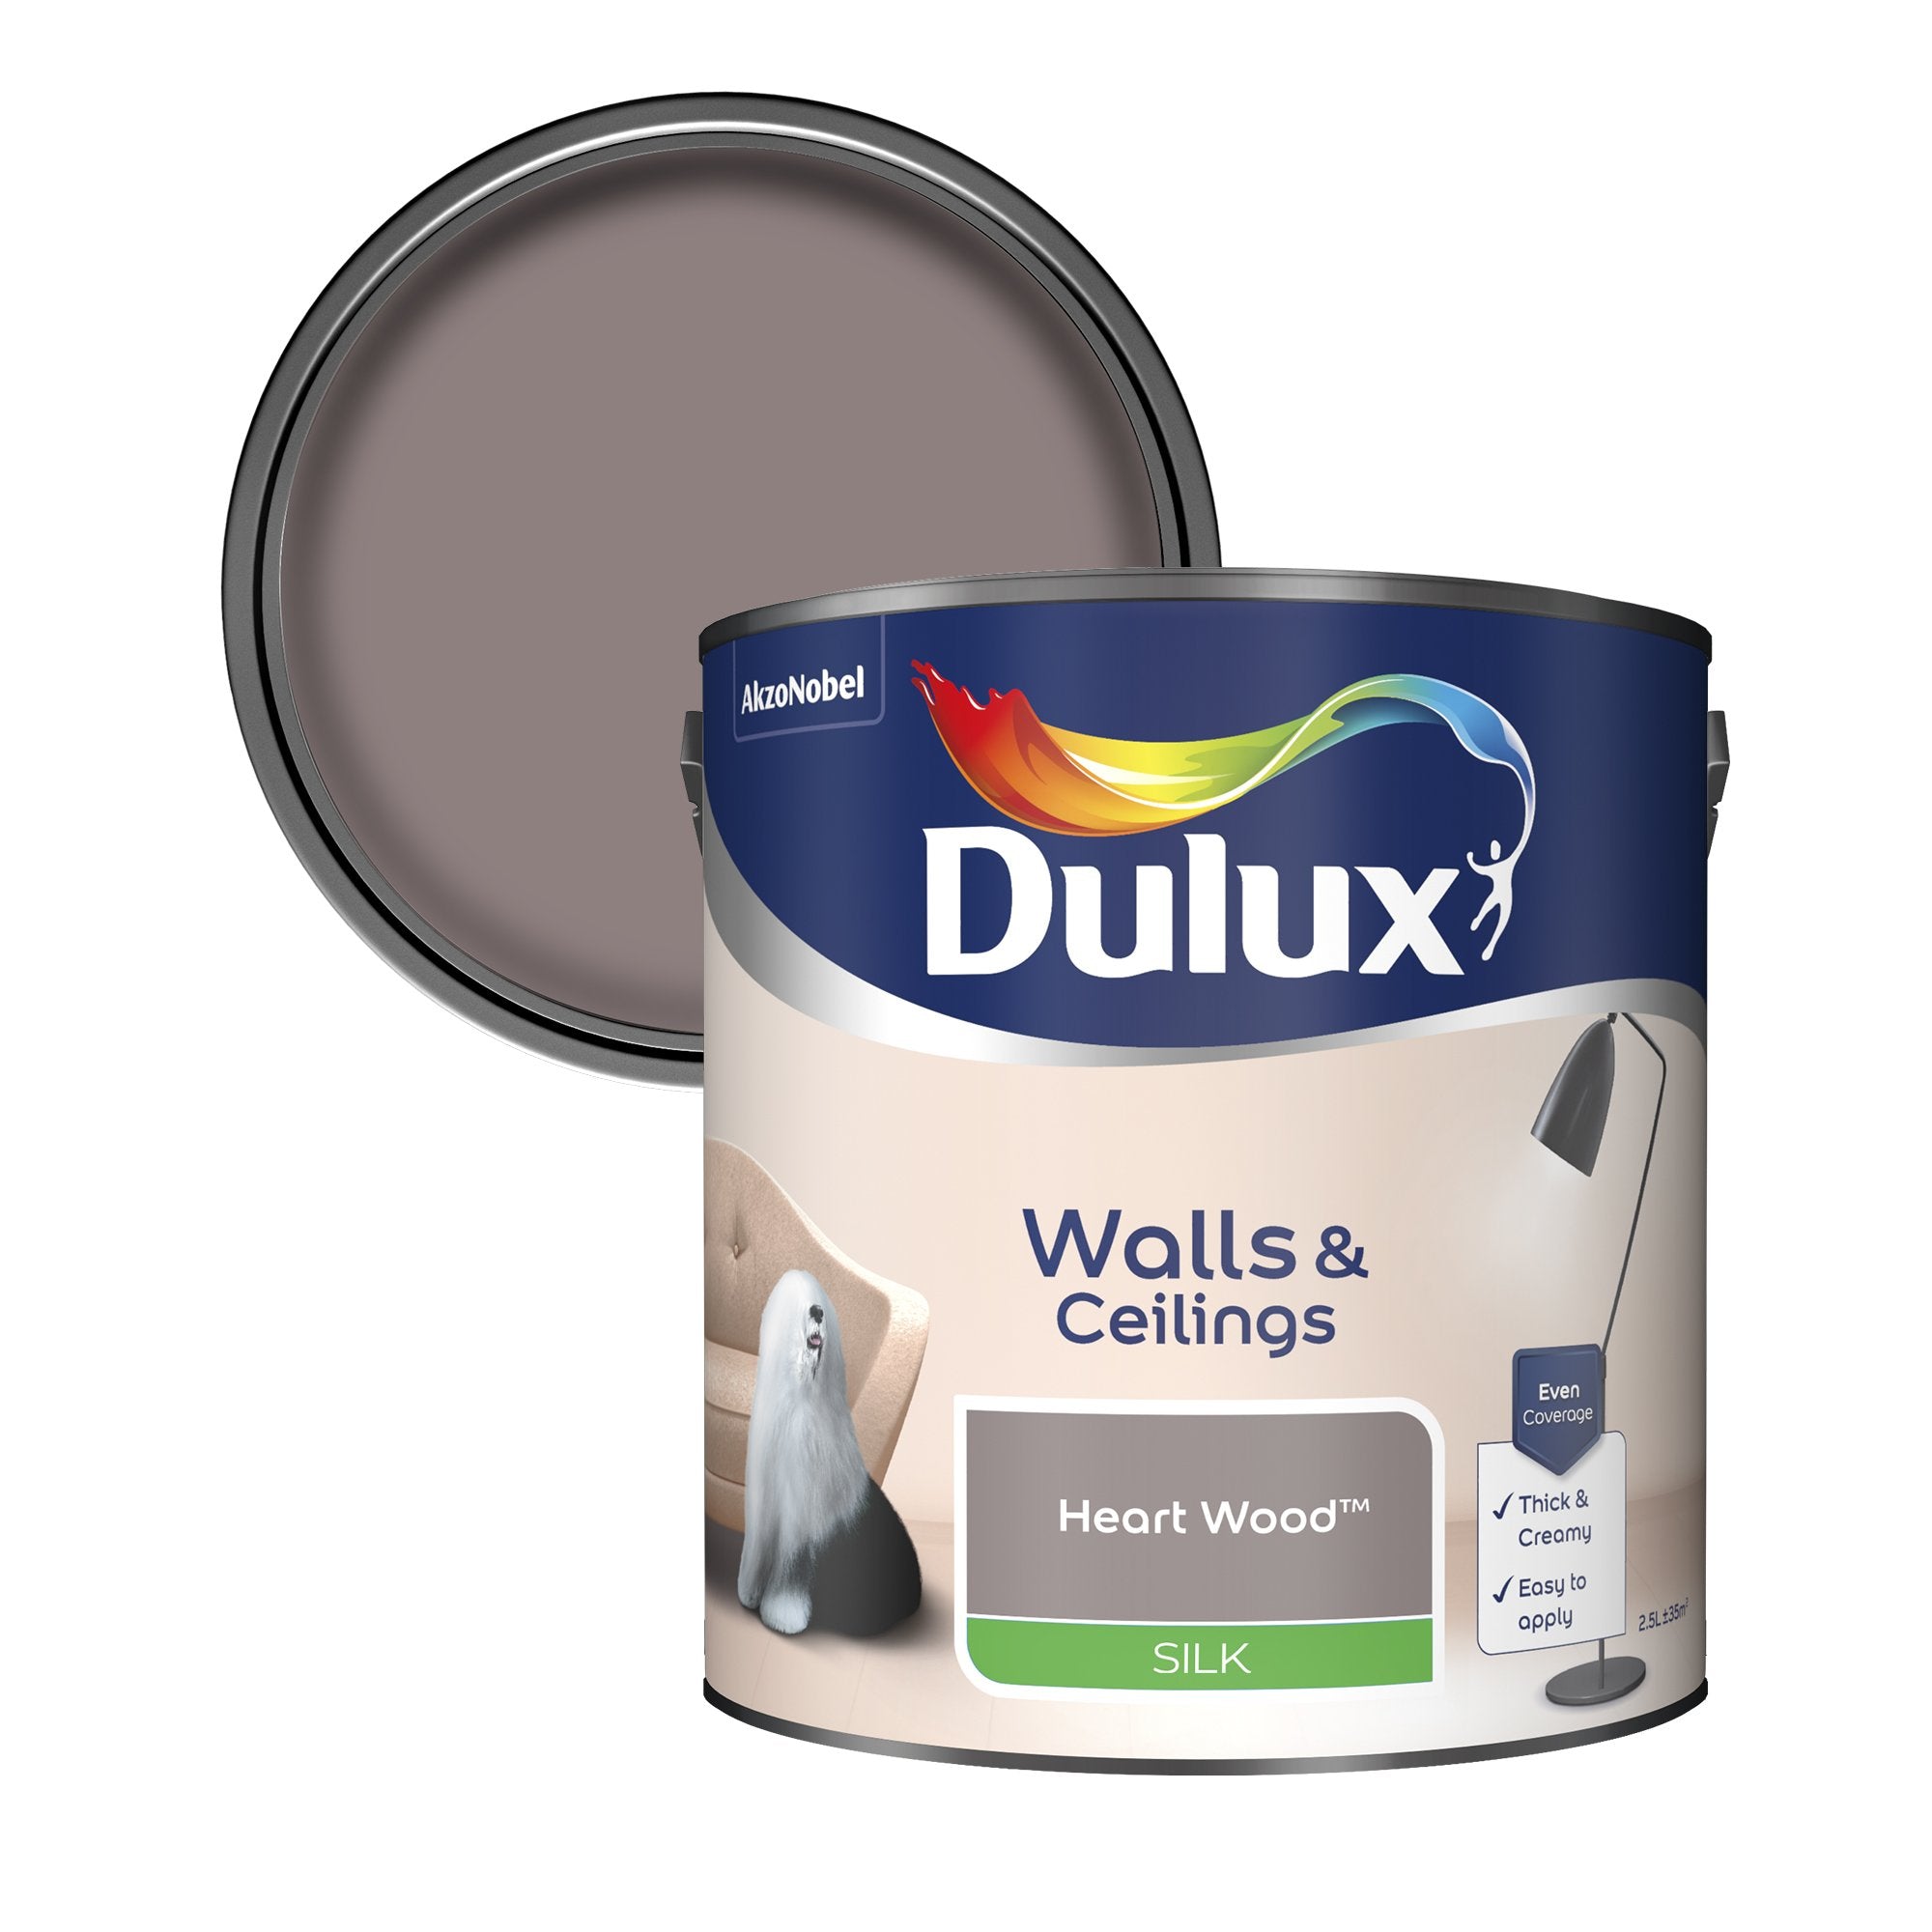 Dulux-Silk-Emulsion-Paint-For-Walls-And-Ceilings-Heart-Wood-2.5L